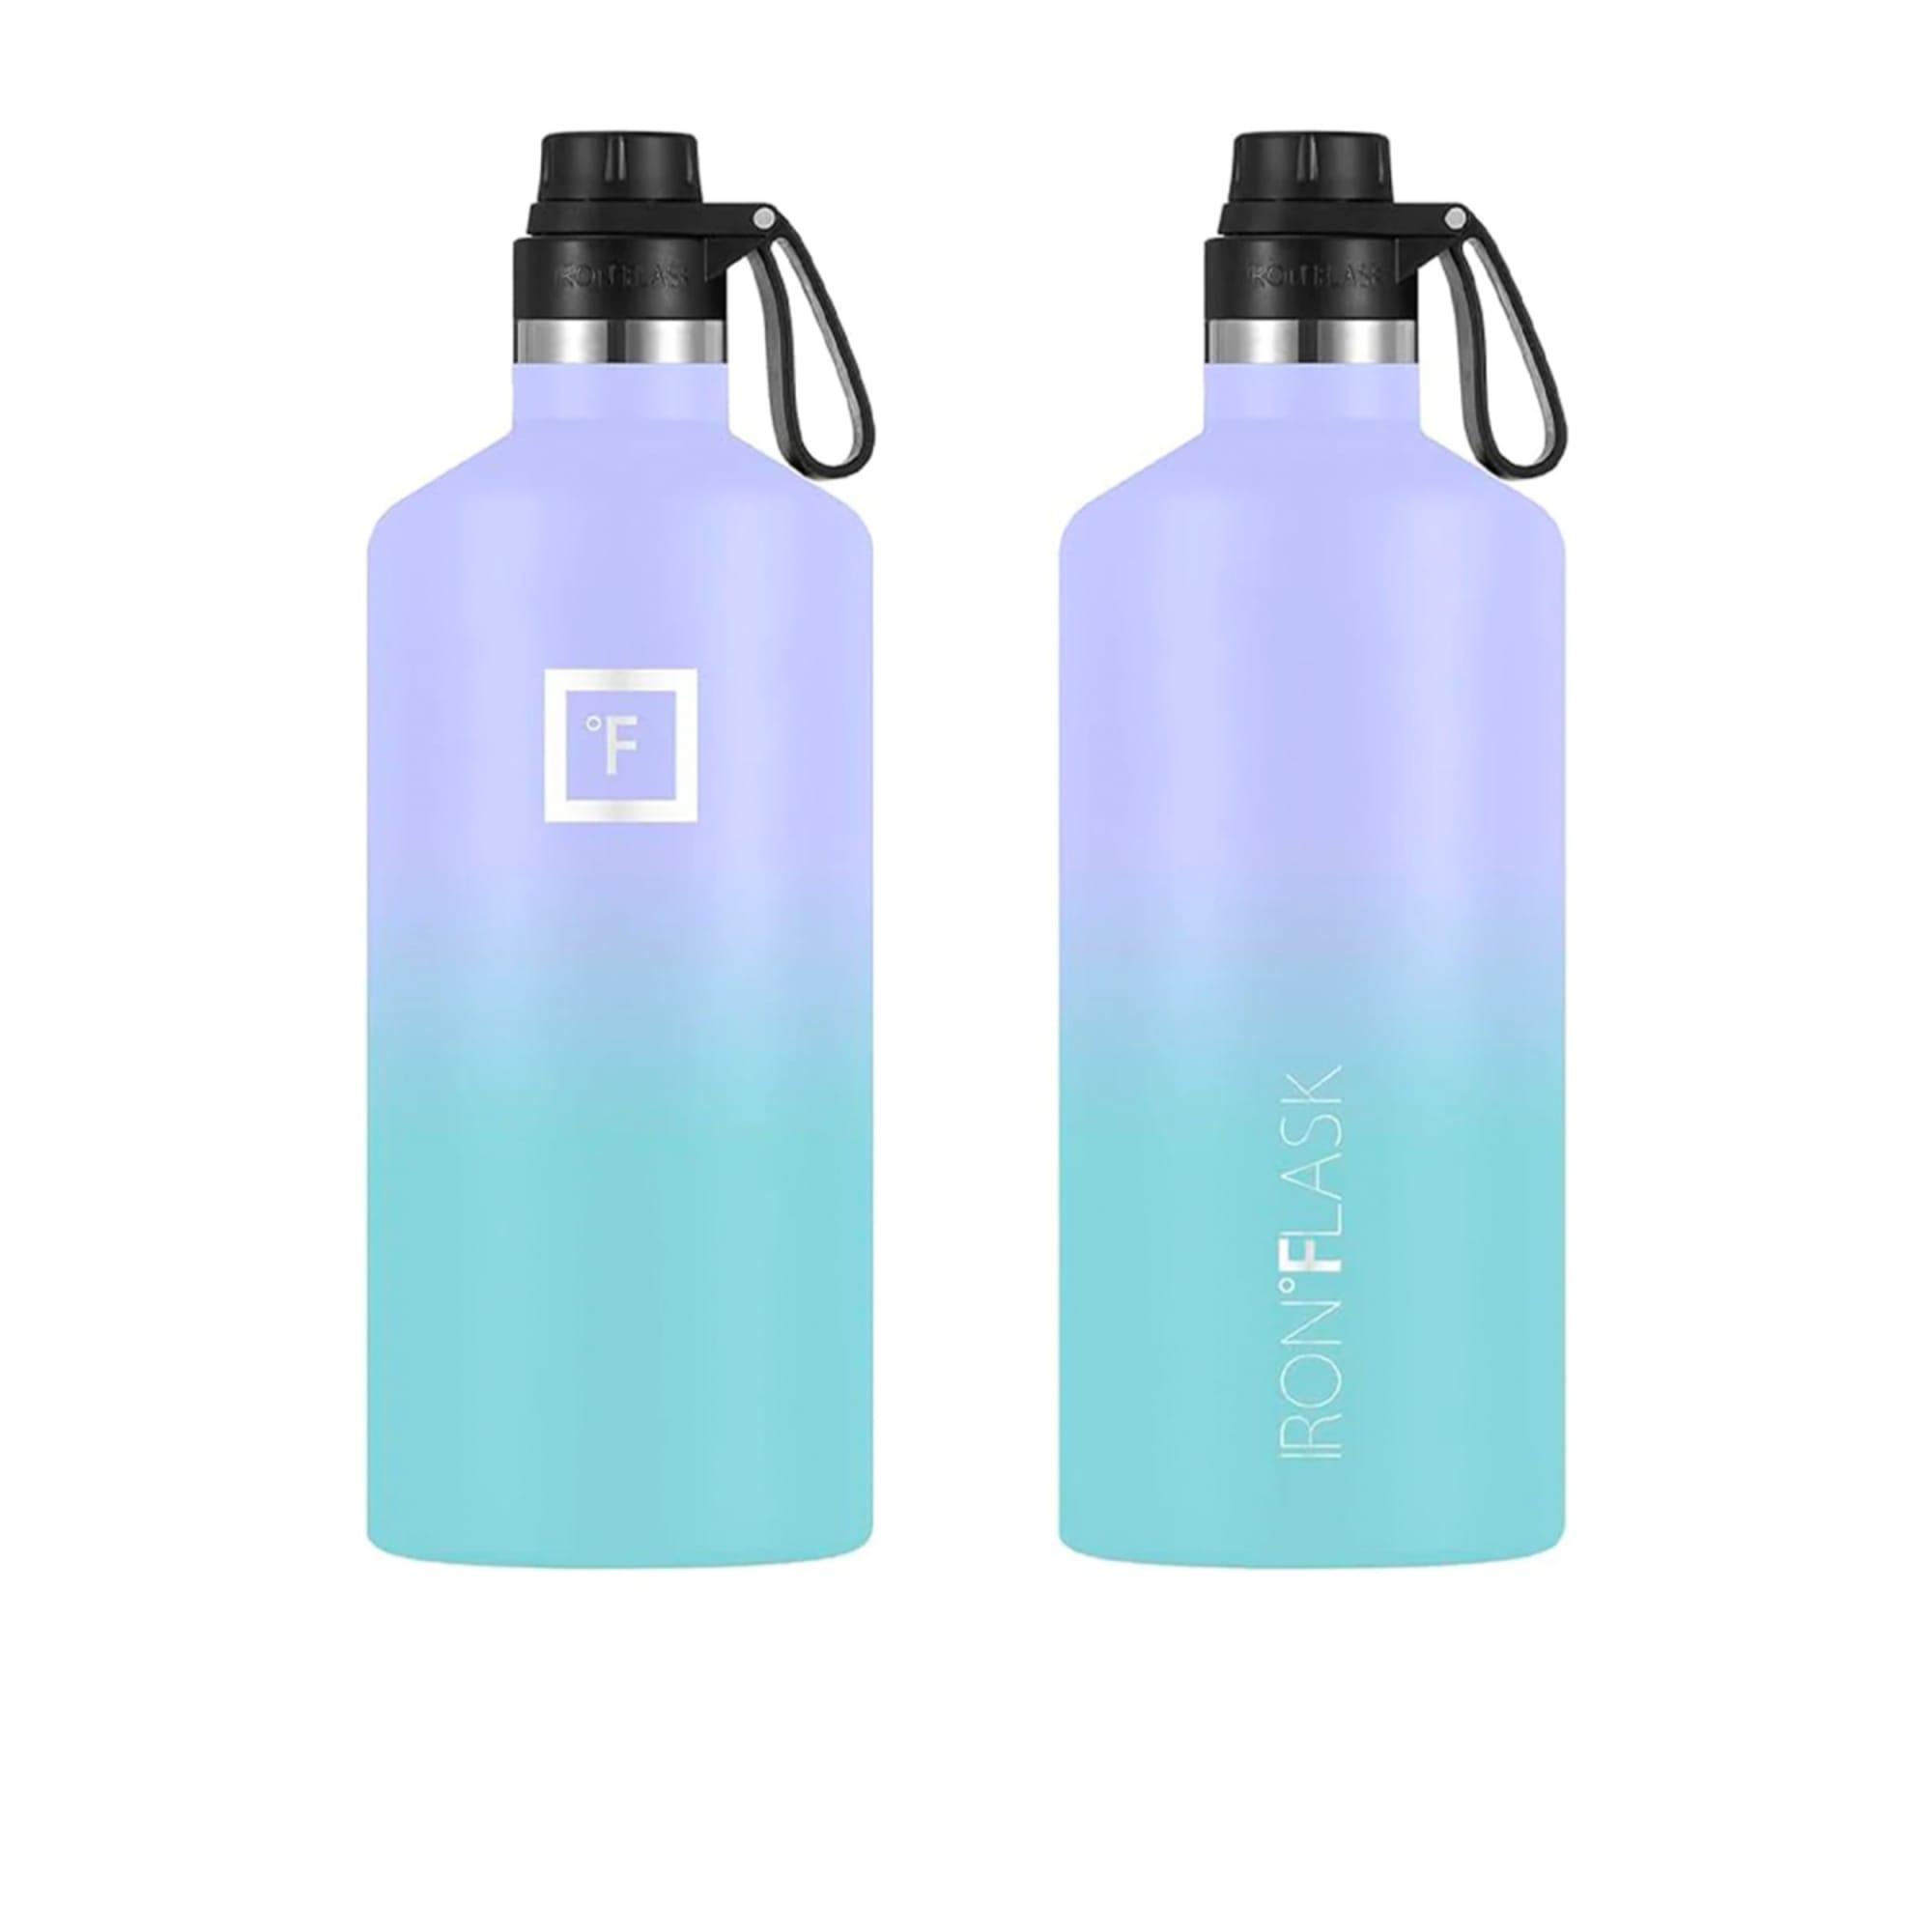 Iron Flask Narrow Mouth Bottle with Spout Lid 1.9L Cotton Candy Image 2